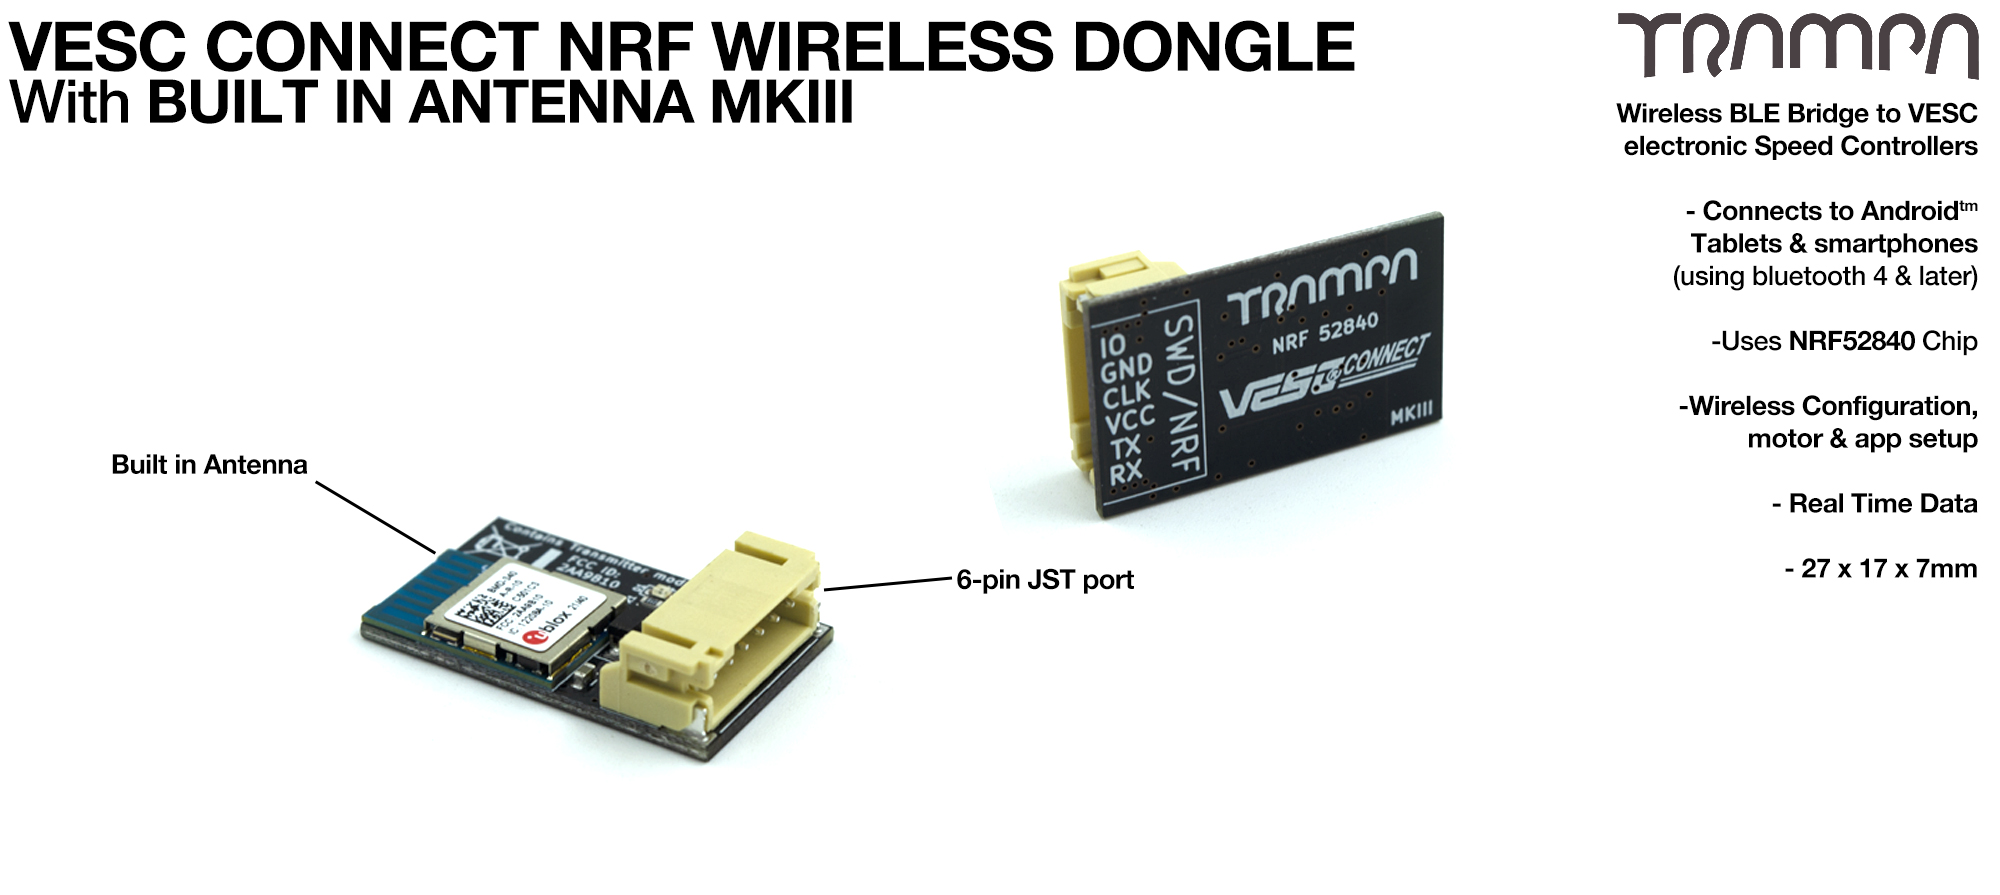 VESC Connect NRF Wireless Dongle with INTEGRATED Antenna 